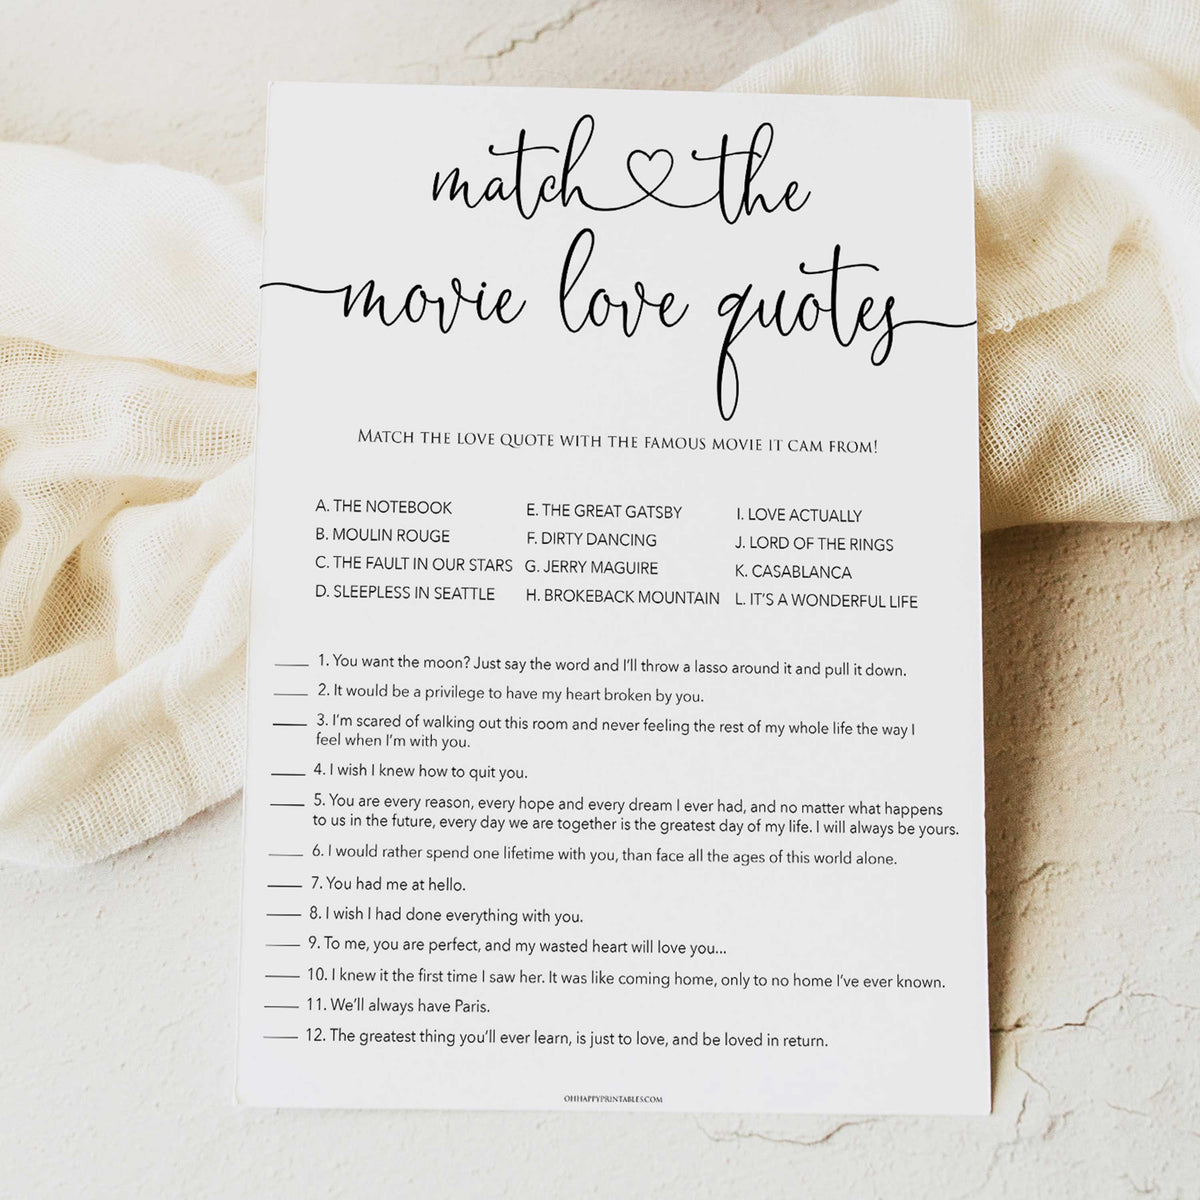 minimalist bachelorette games, match the movie love quotes, dirty bridal games, printable bridal games, bridal shower games, hen party hames, bachelorette games